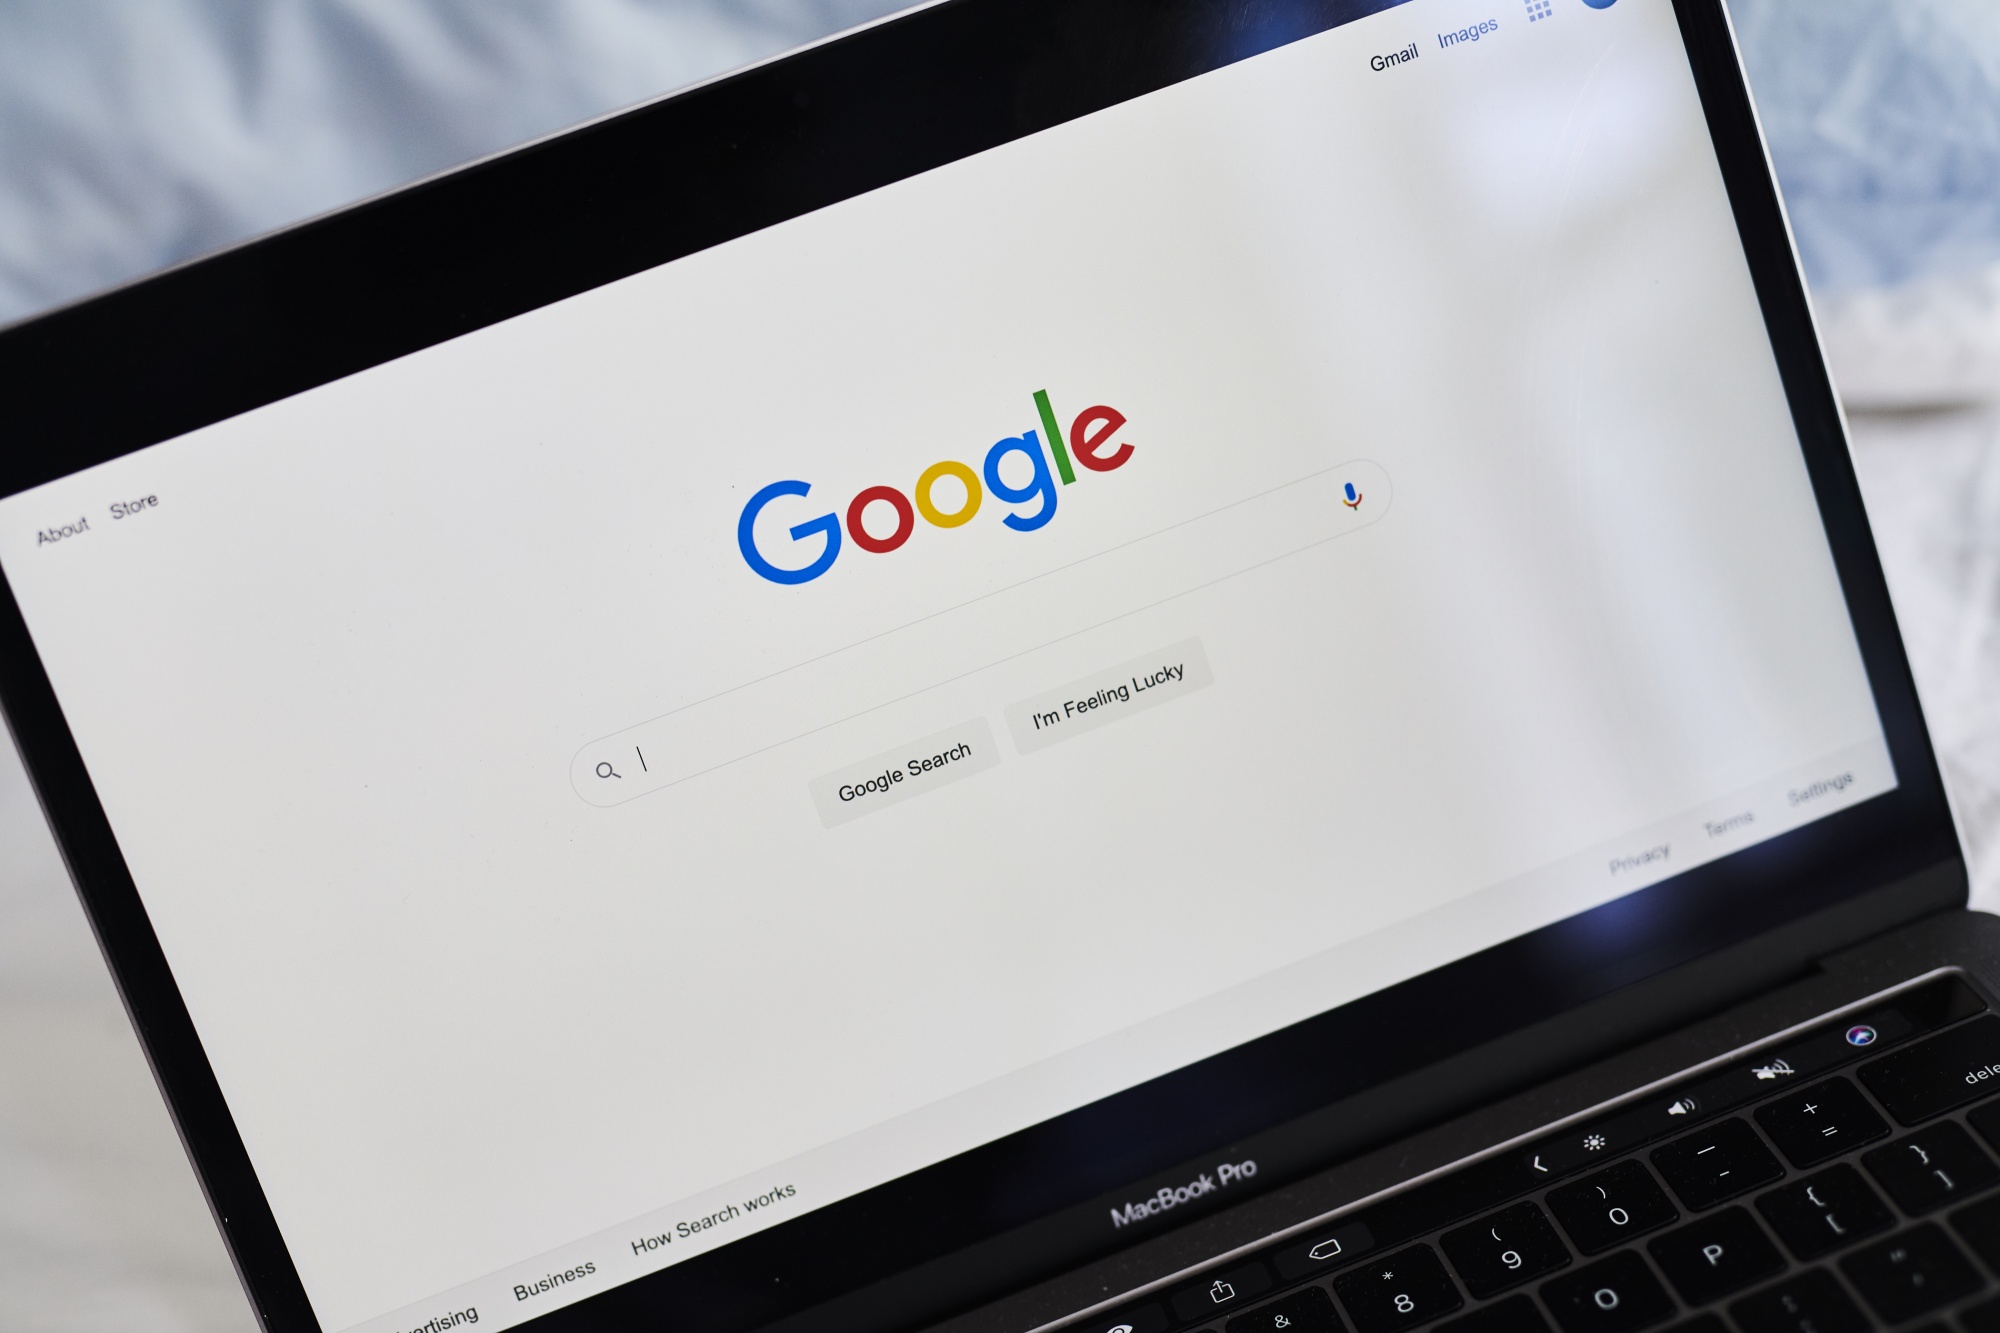 Google Operating System: Google's Edit Search Results Experiment